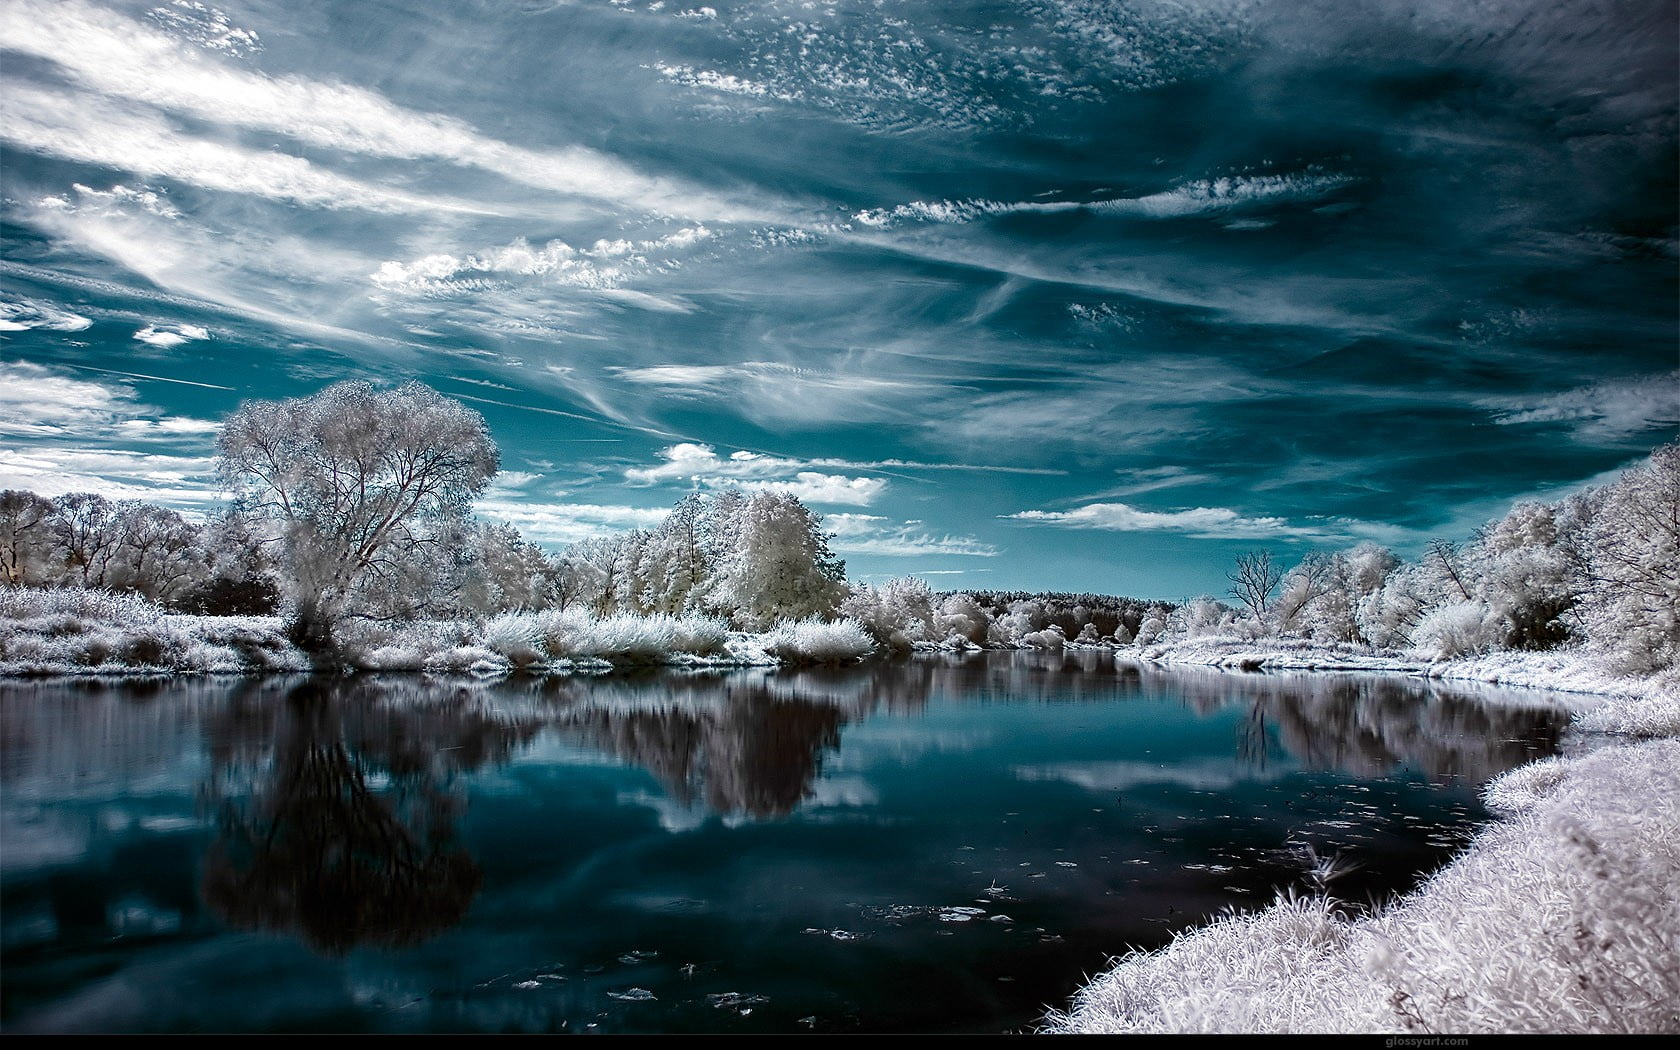 icy trees scenery, landscape, water, winter, lake, infrared, sky